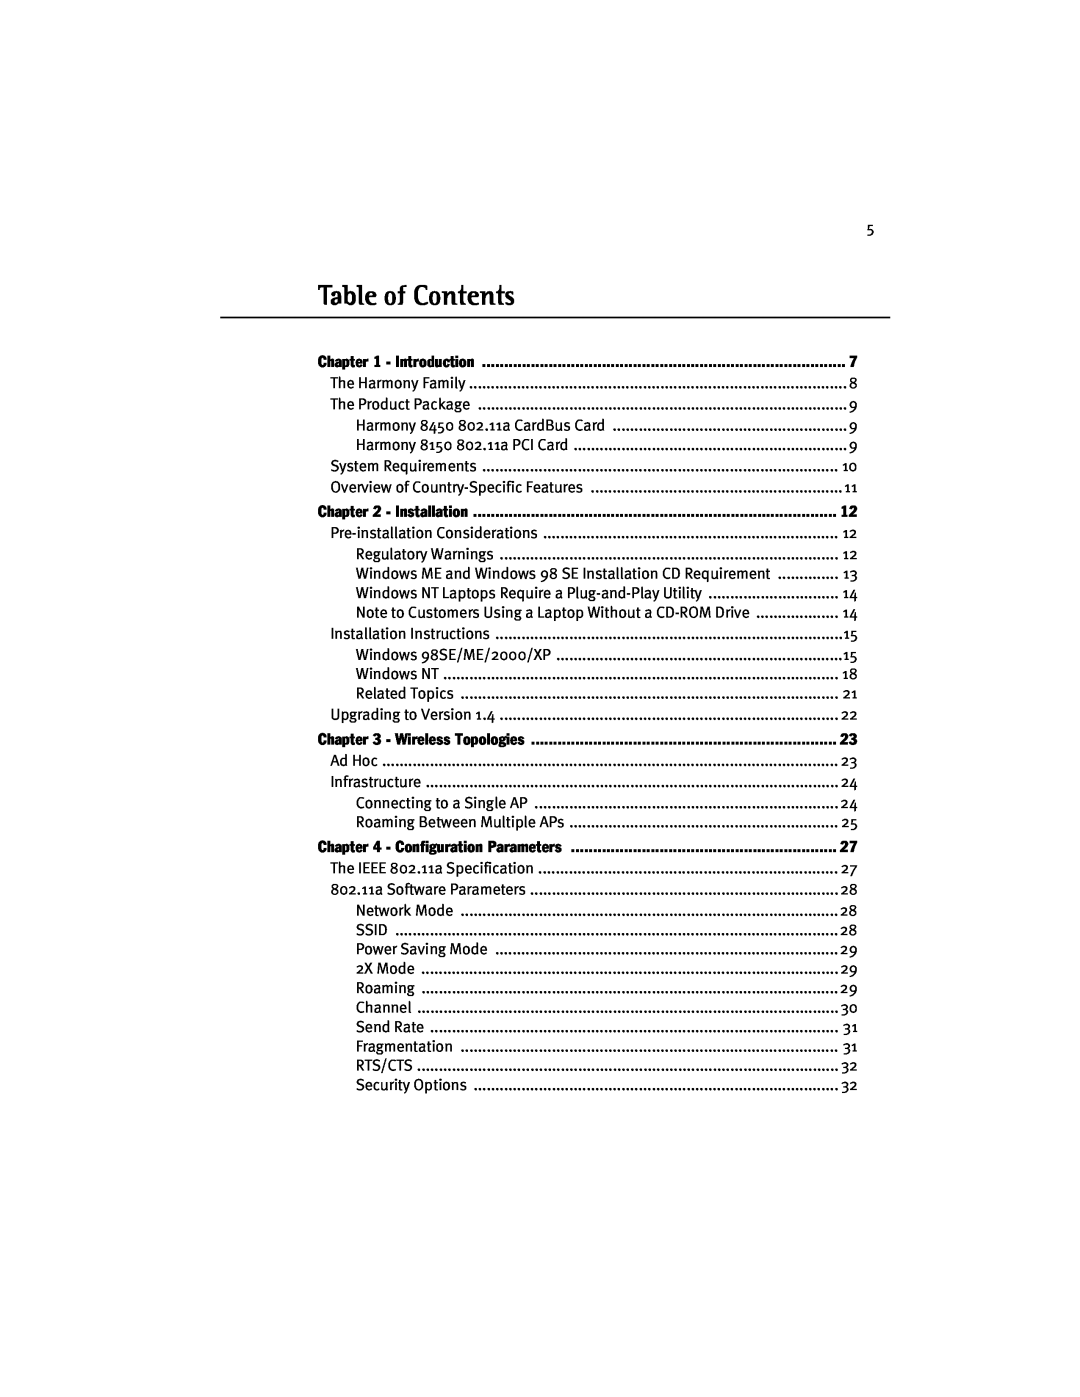 Harmony House 802.11a manual Table of Contents 